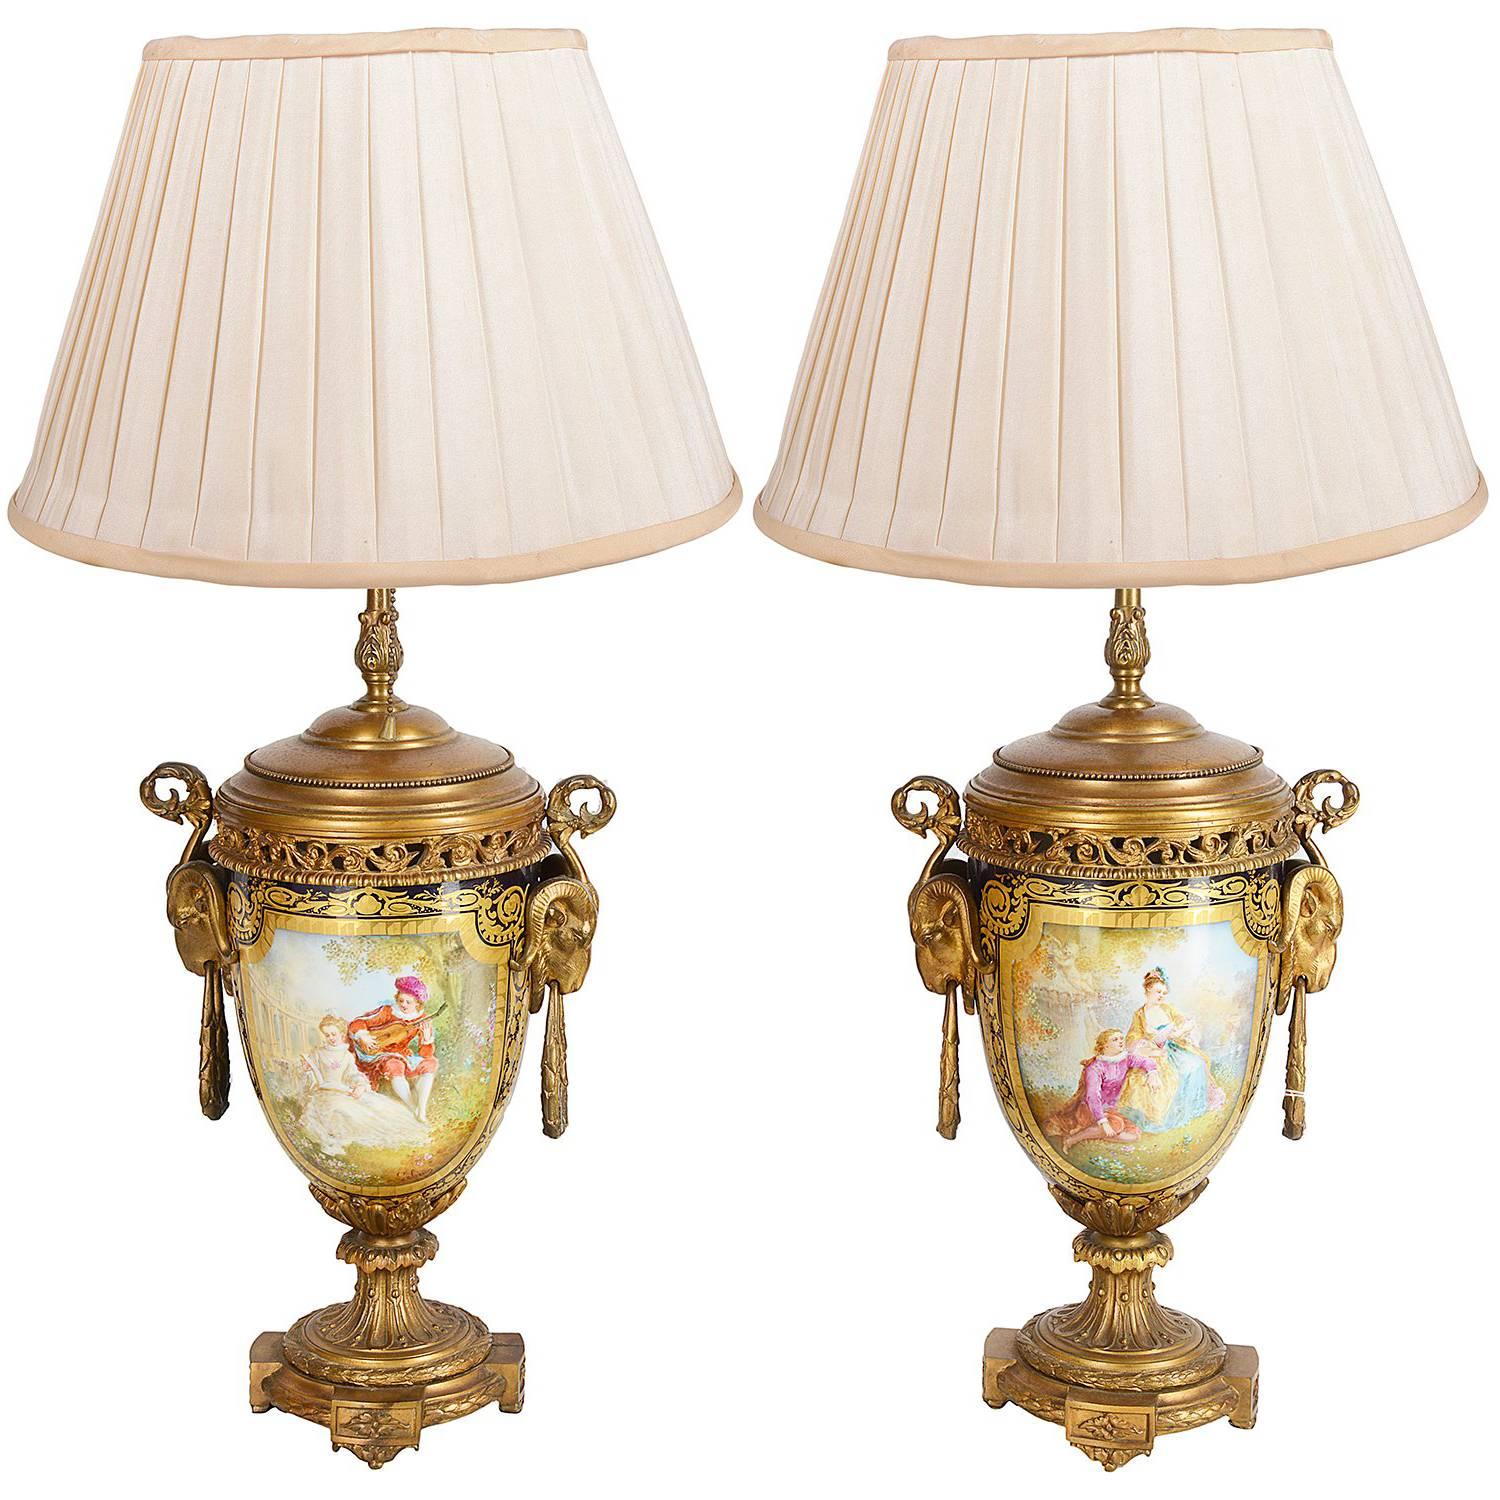 Pair of 19th Century French Sevres Style Vases or Lamps